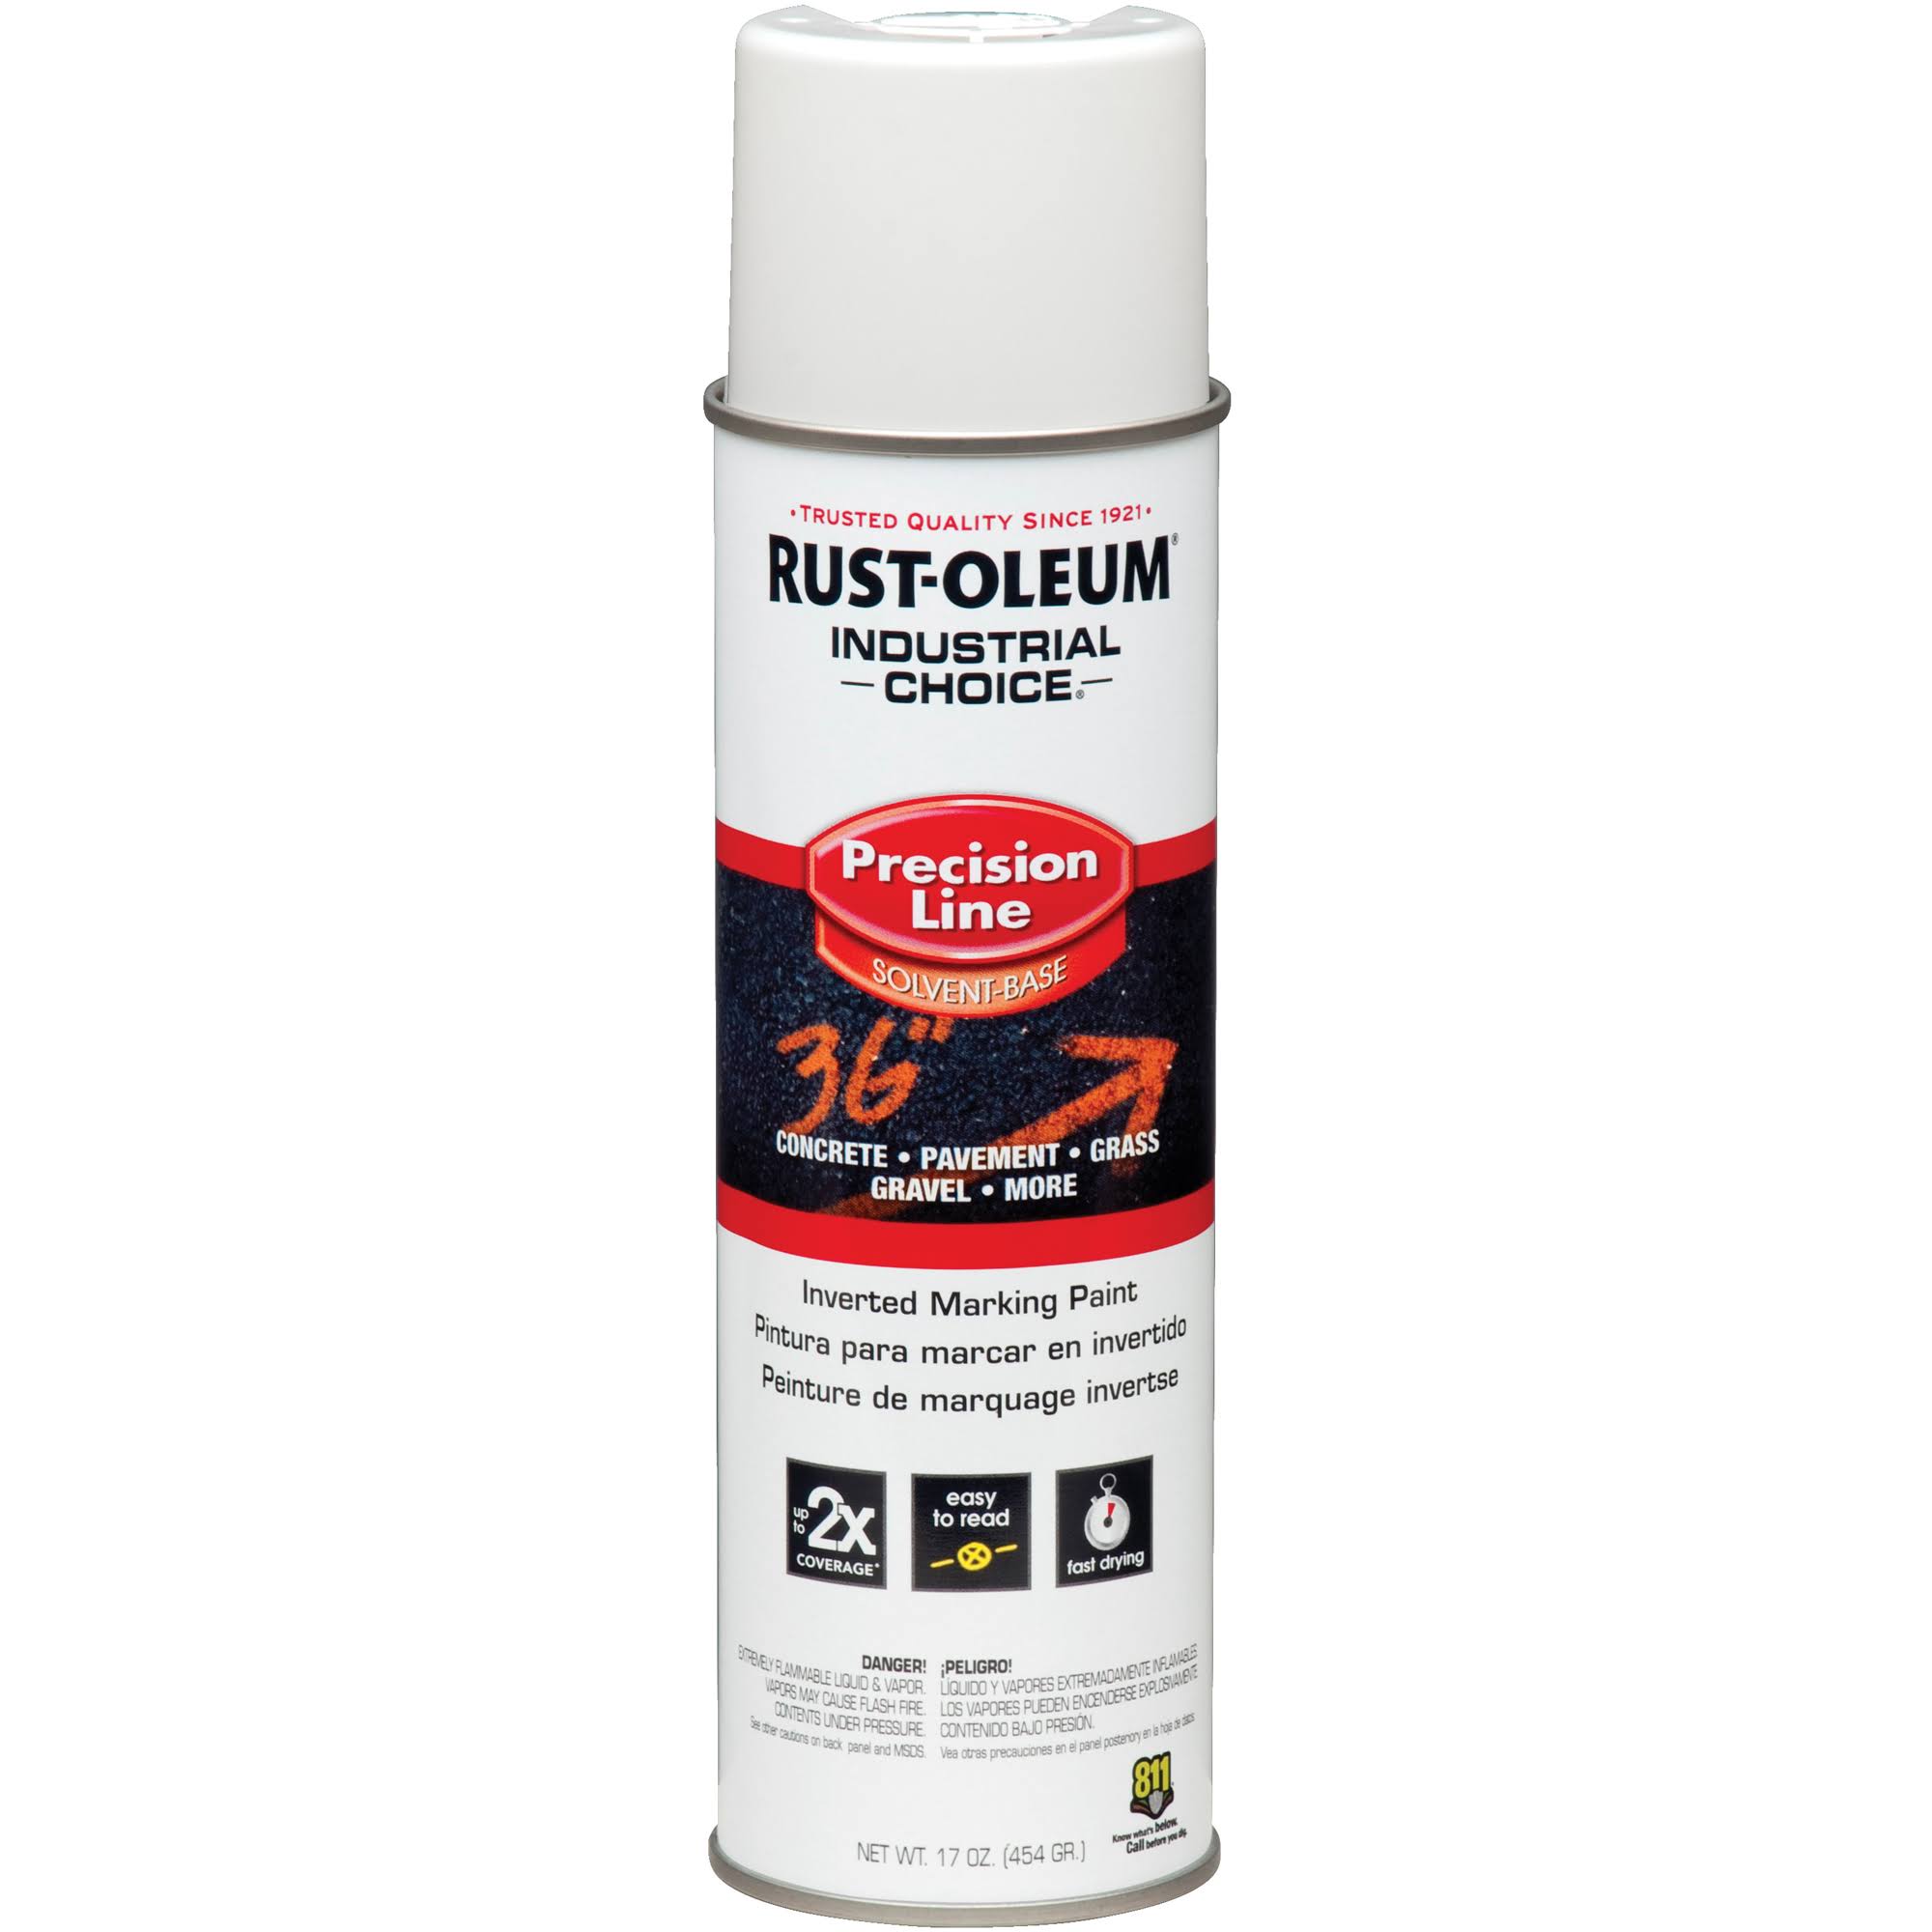 Rust-Oleum Precision Line Inverted Marking Paint - White